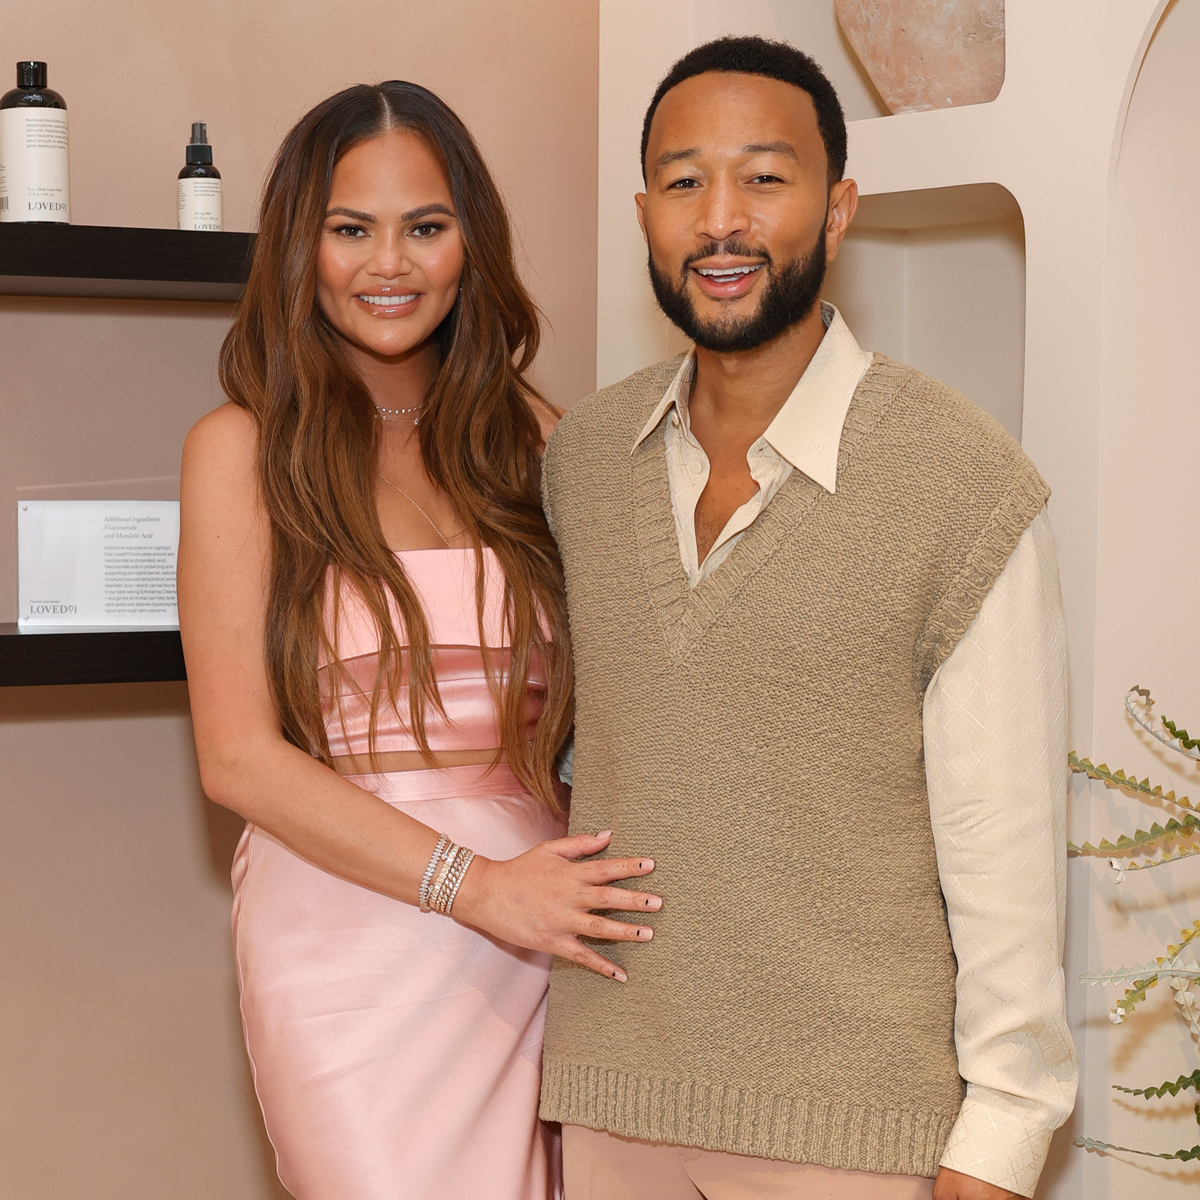 Proof Chrissy Teigen and John Legend’s Home Is Far From Ordinary